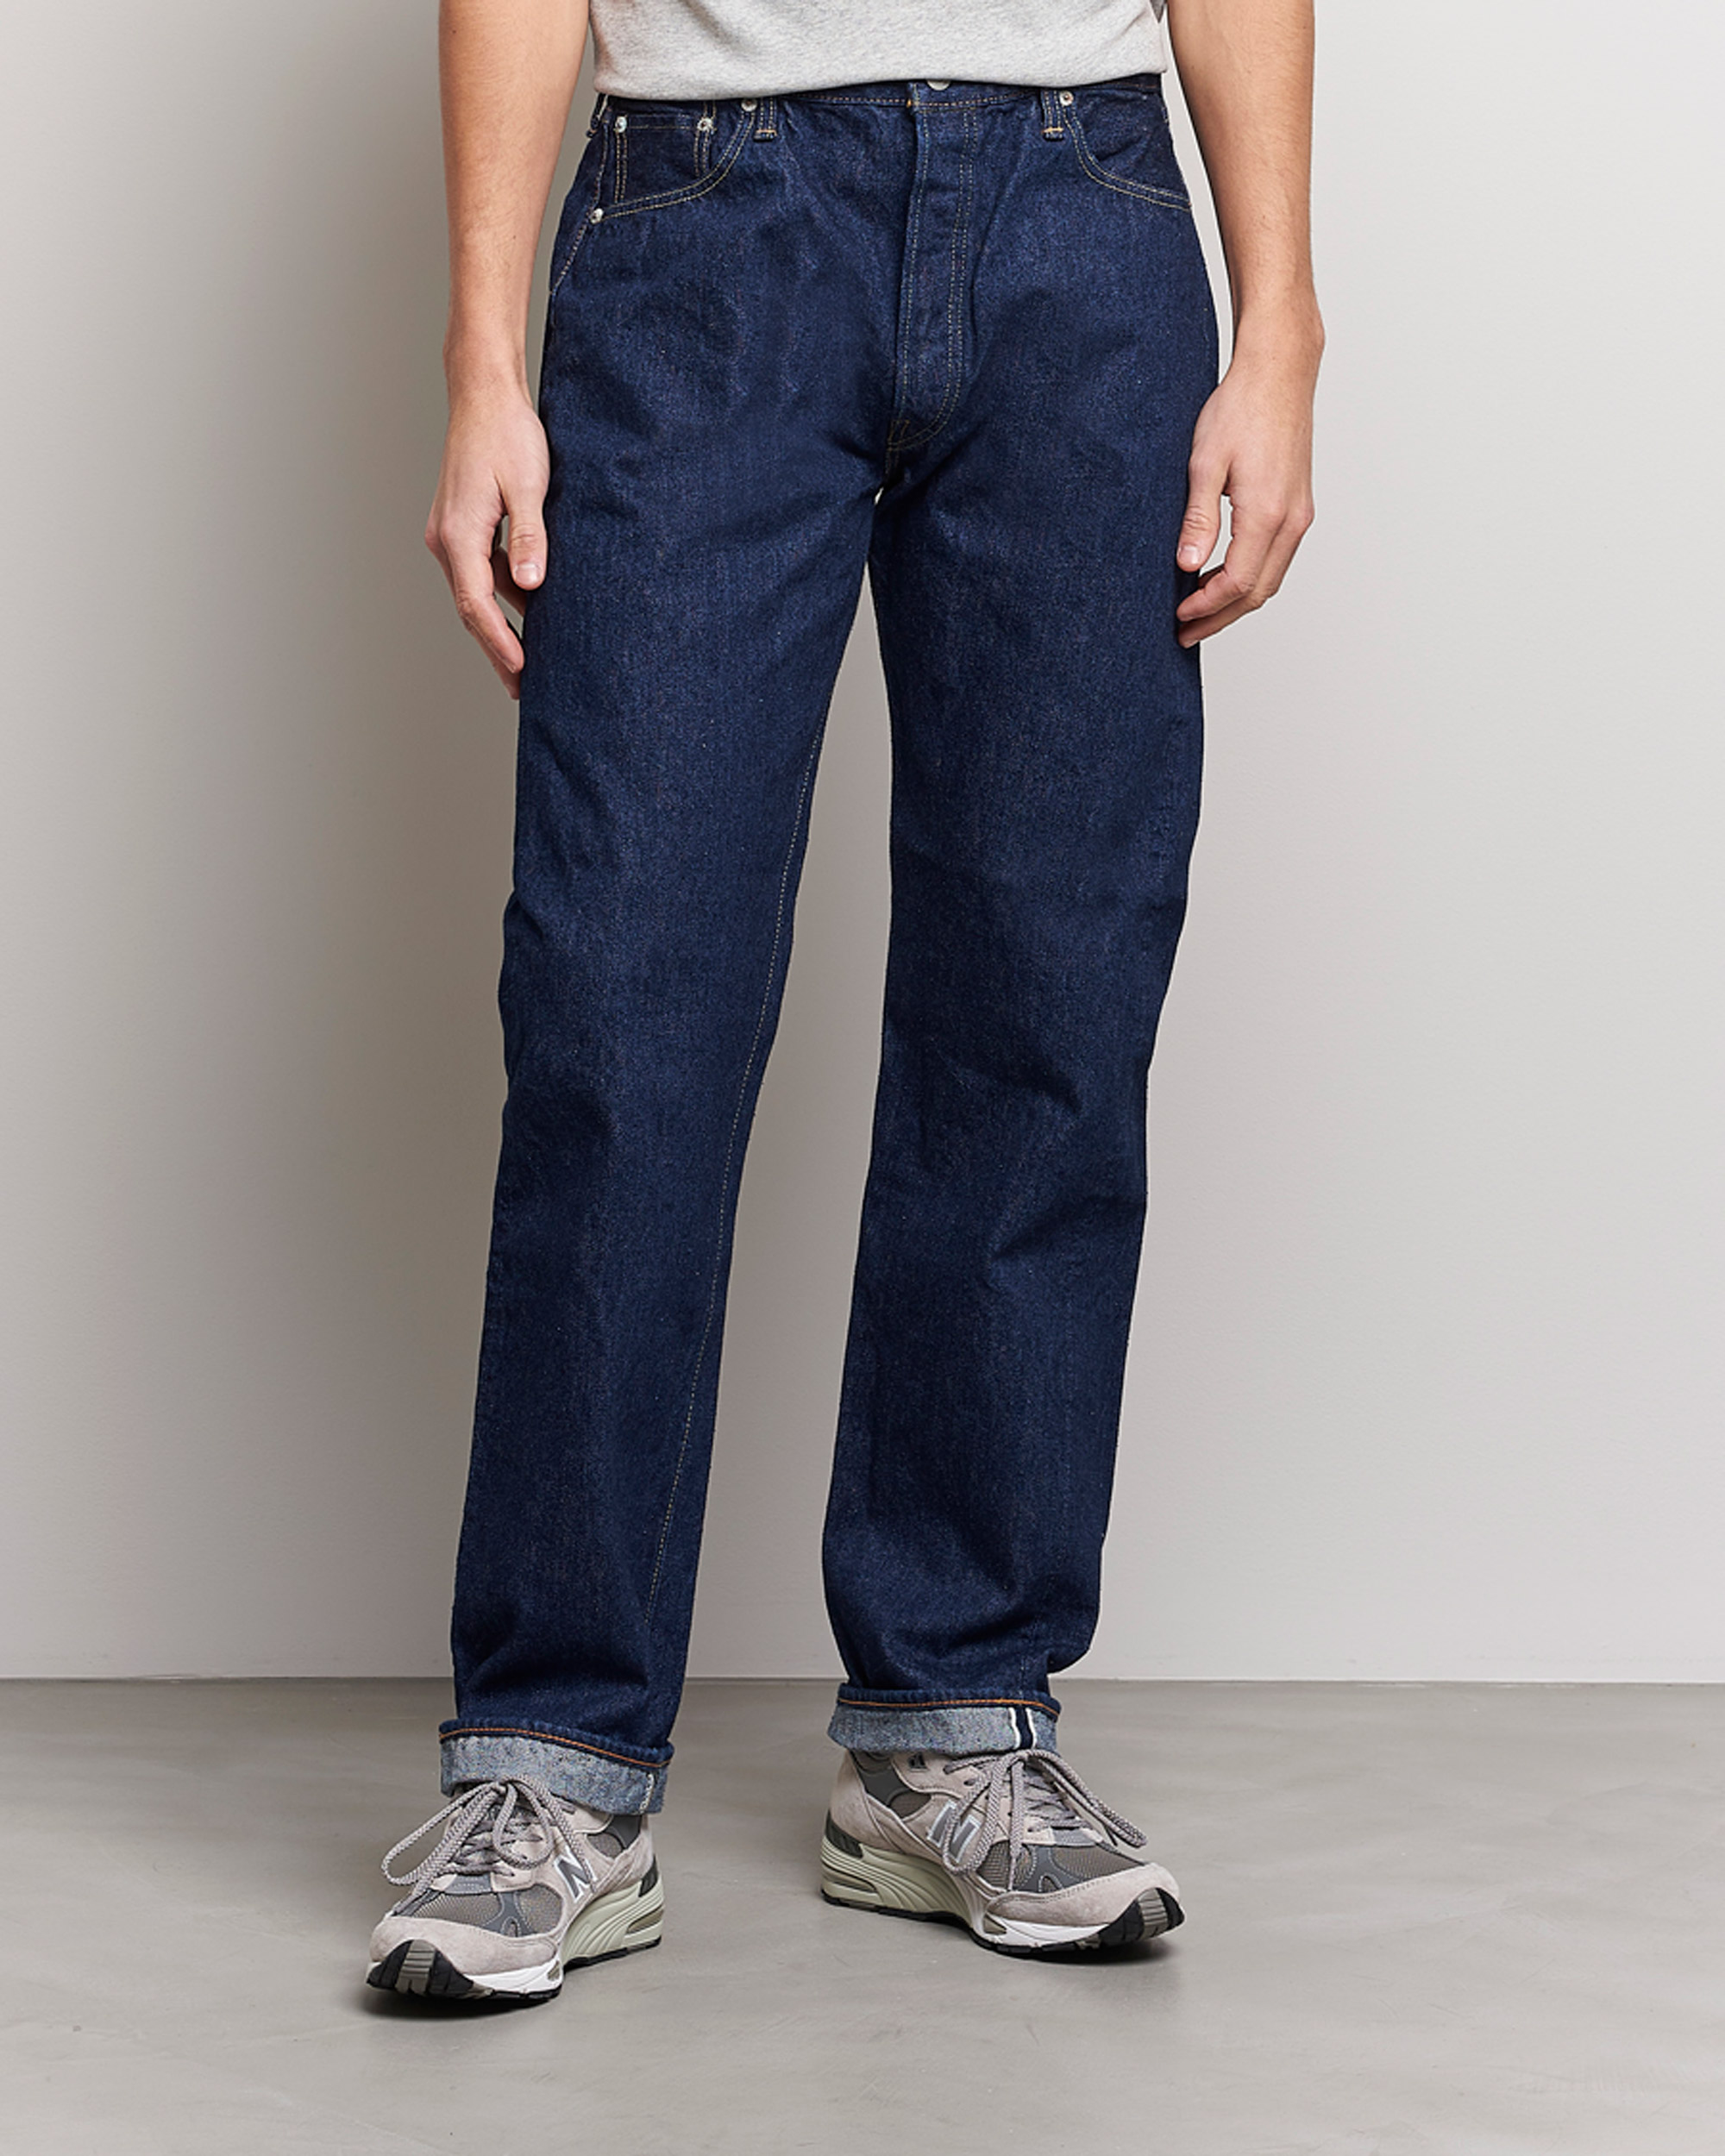 Mies | Siniset farkut | orSlow | Straight Fit 105 Selvedge Jeans One Wash